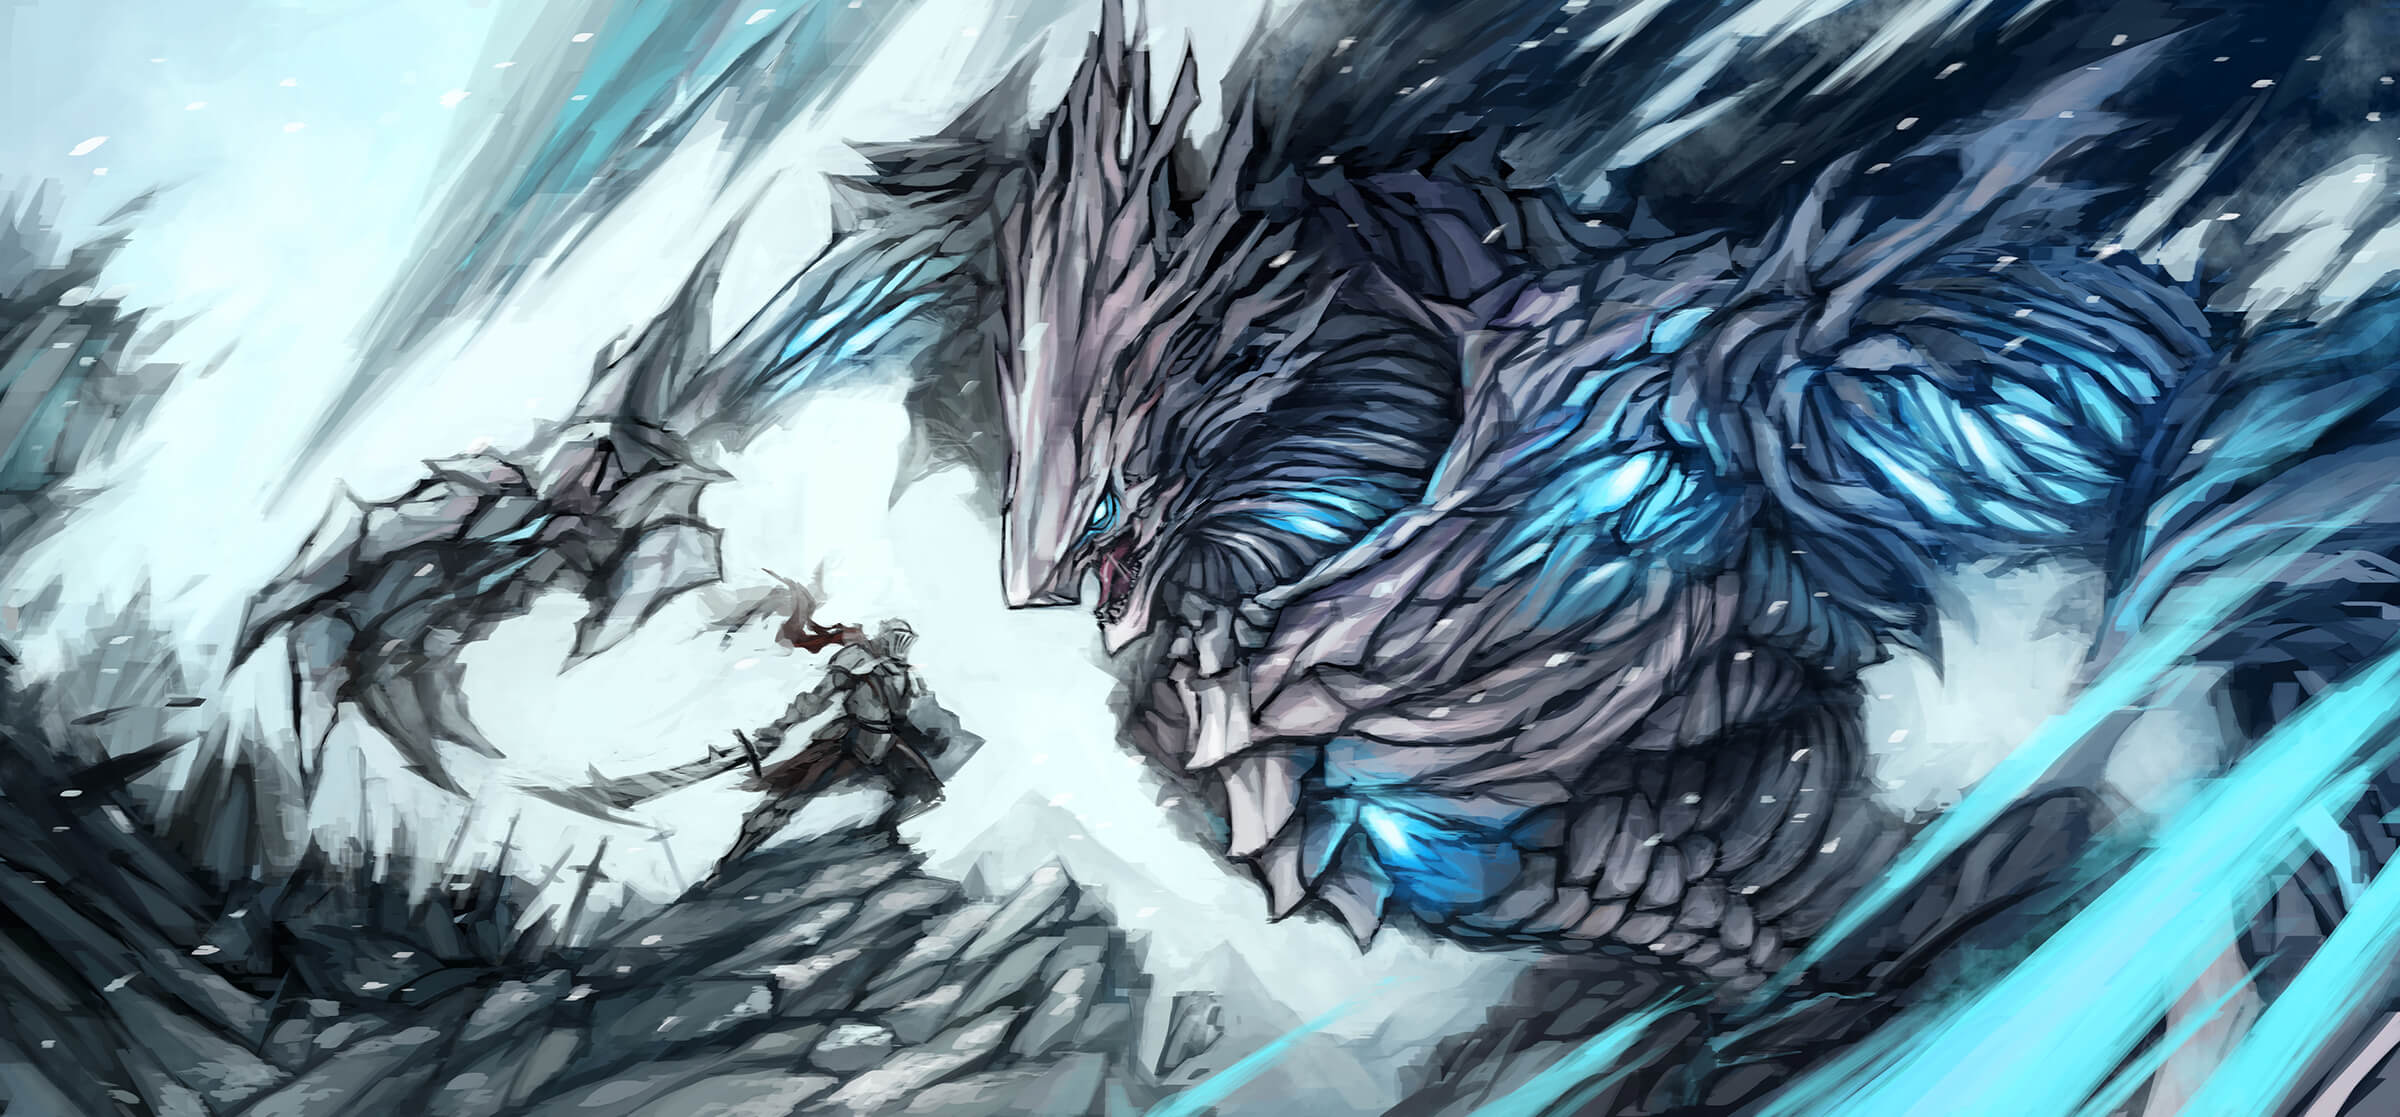 A knight with a sword and iron armor stands off against a gray, stone-faceted beast with glowing-blue points around its body.